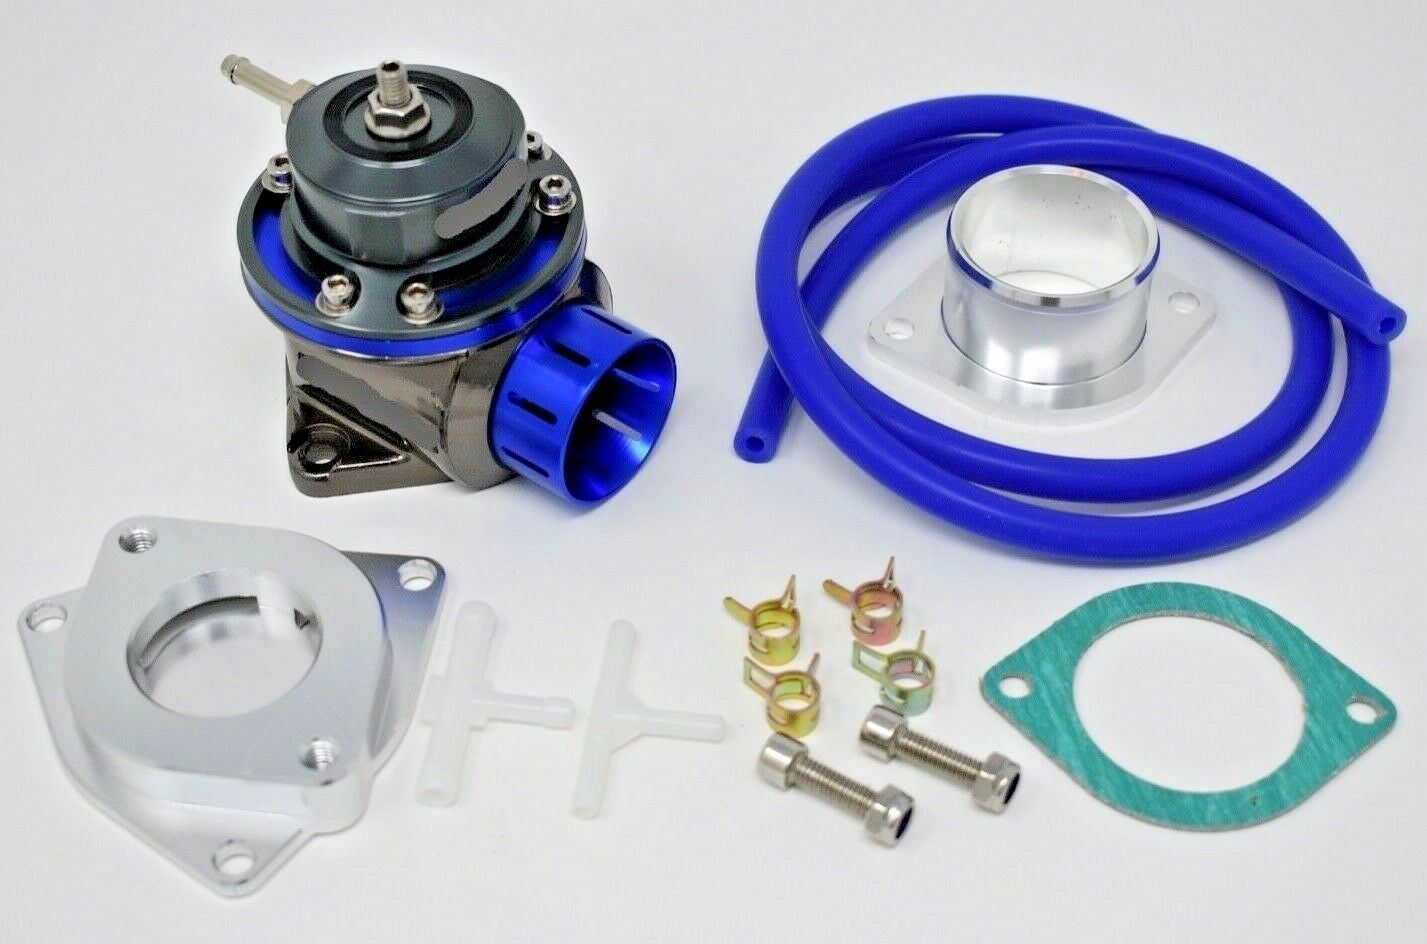 Type FV Blow Off Valve For Hyundai Genesis Coupe 2.0T BOV W/ Adapter Flange 🇺🇸